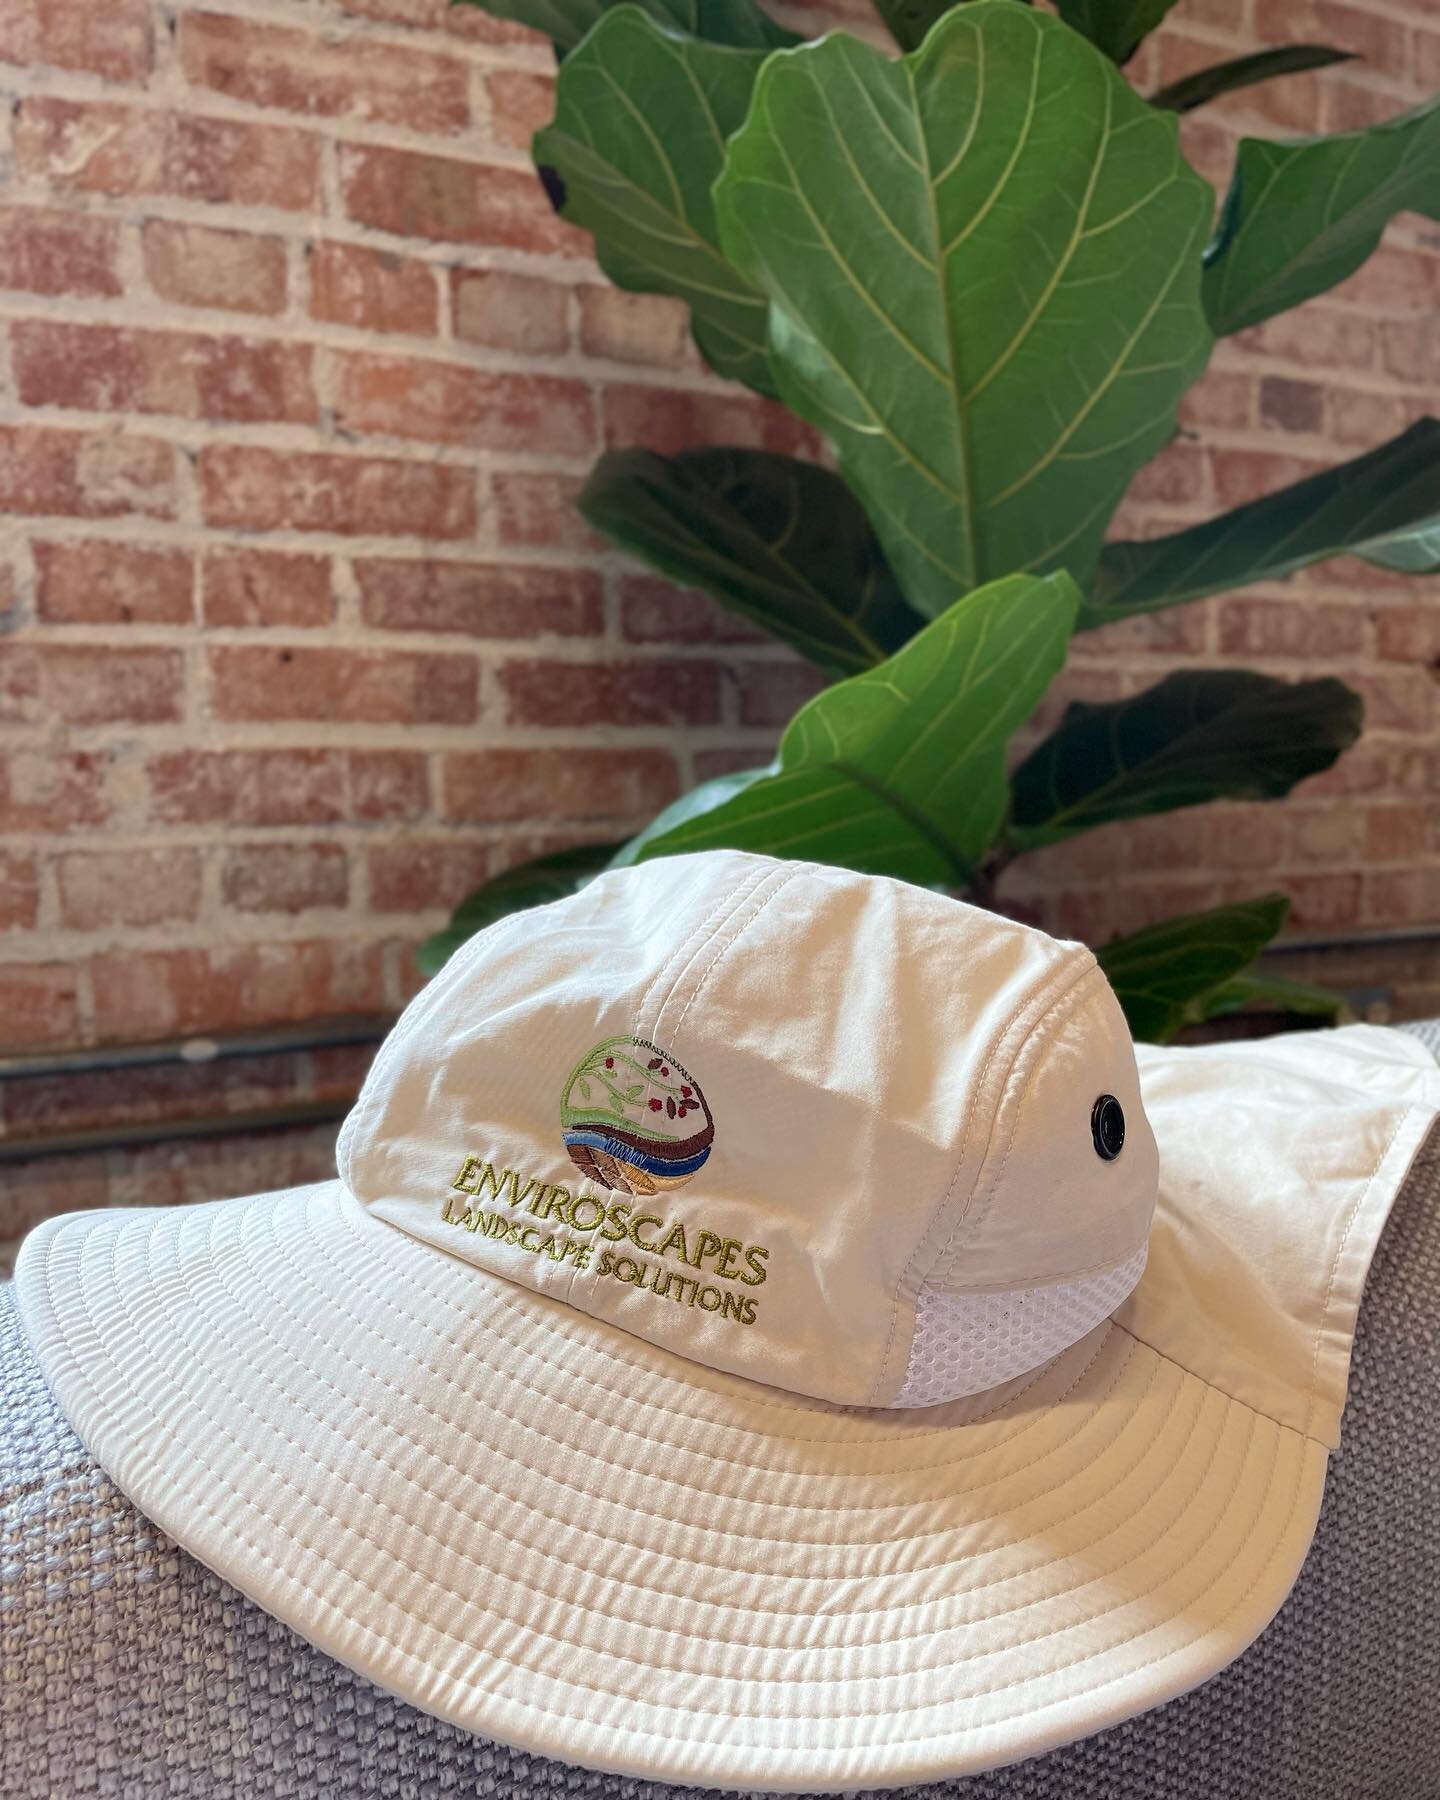 When fun meets functional 🤩 

Zipper pocket perfect for an ice pack to keep you cool, clip to keep your hat on when it&rsquo;s windy, and sun protection all in one? Yes please 🙌🏼

#landscaping #brandedmerchandise #promotionalproducts #hat #functio